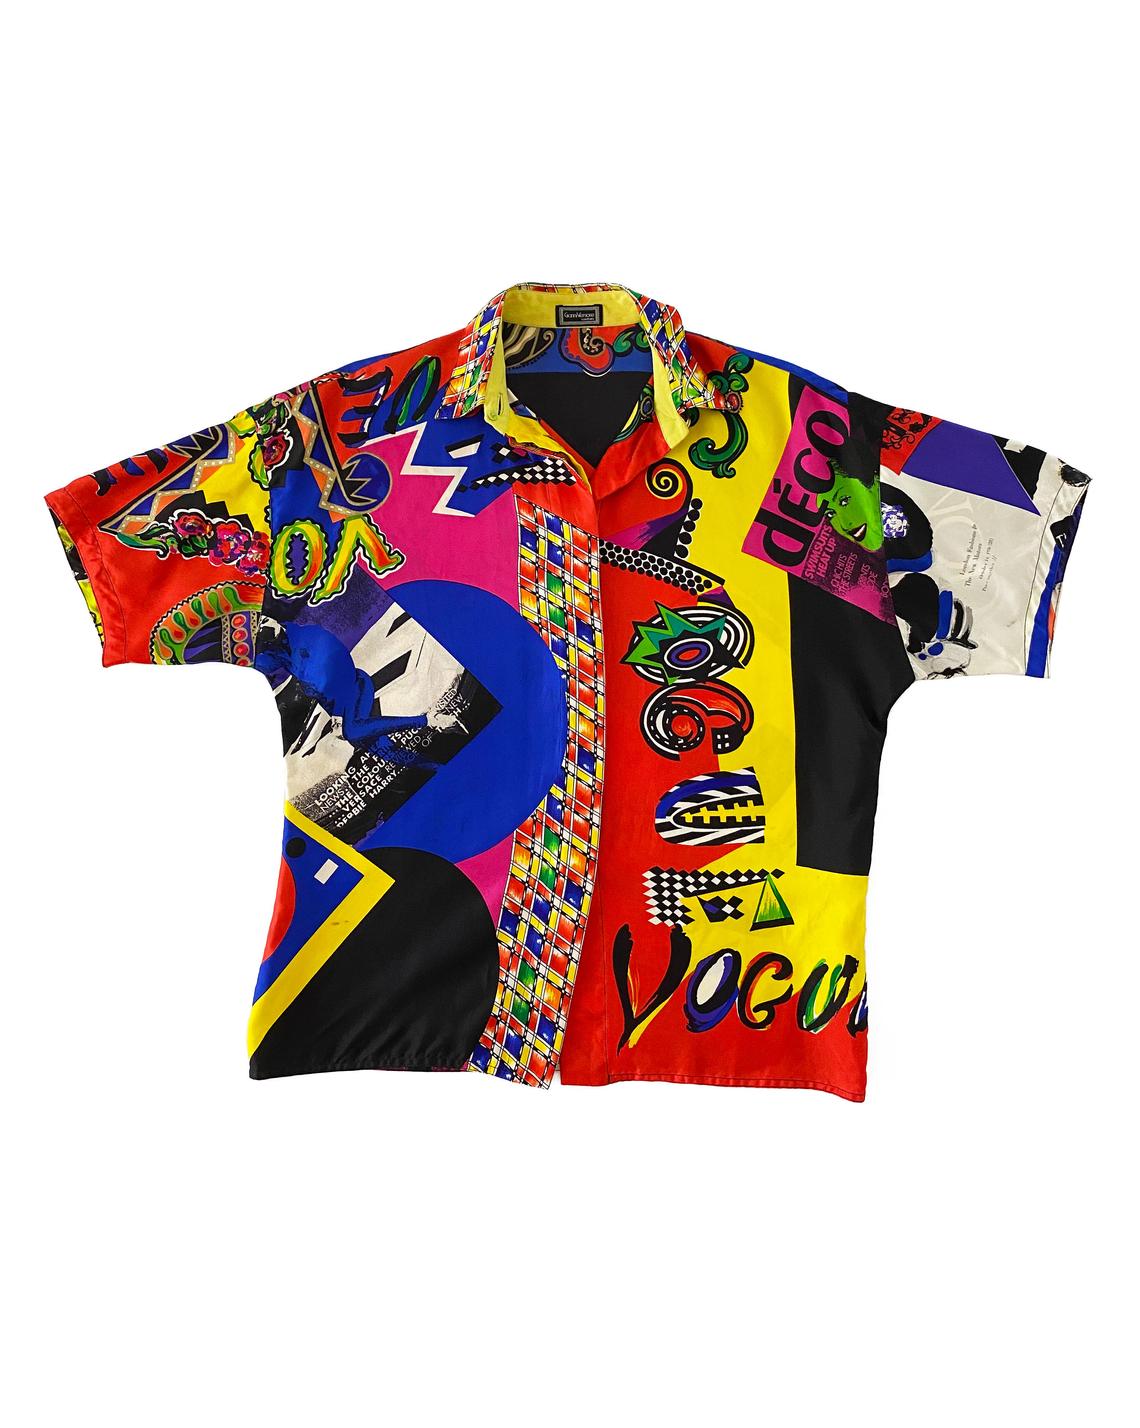 FRUIT Vintage Gianni Versace Vogue print silk short sleeve shirt from the Spring 1991 collection (as worn by Christy Turlington on the Runway). It features the iconic Vogue print in large scale all over and gold feature button on collar.